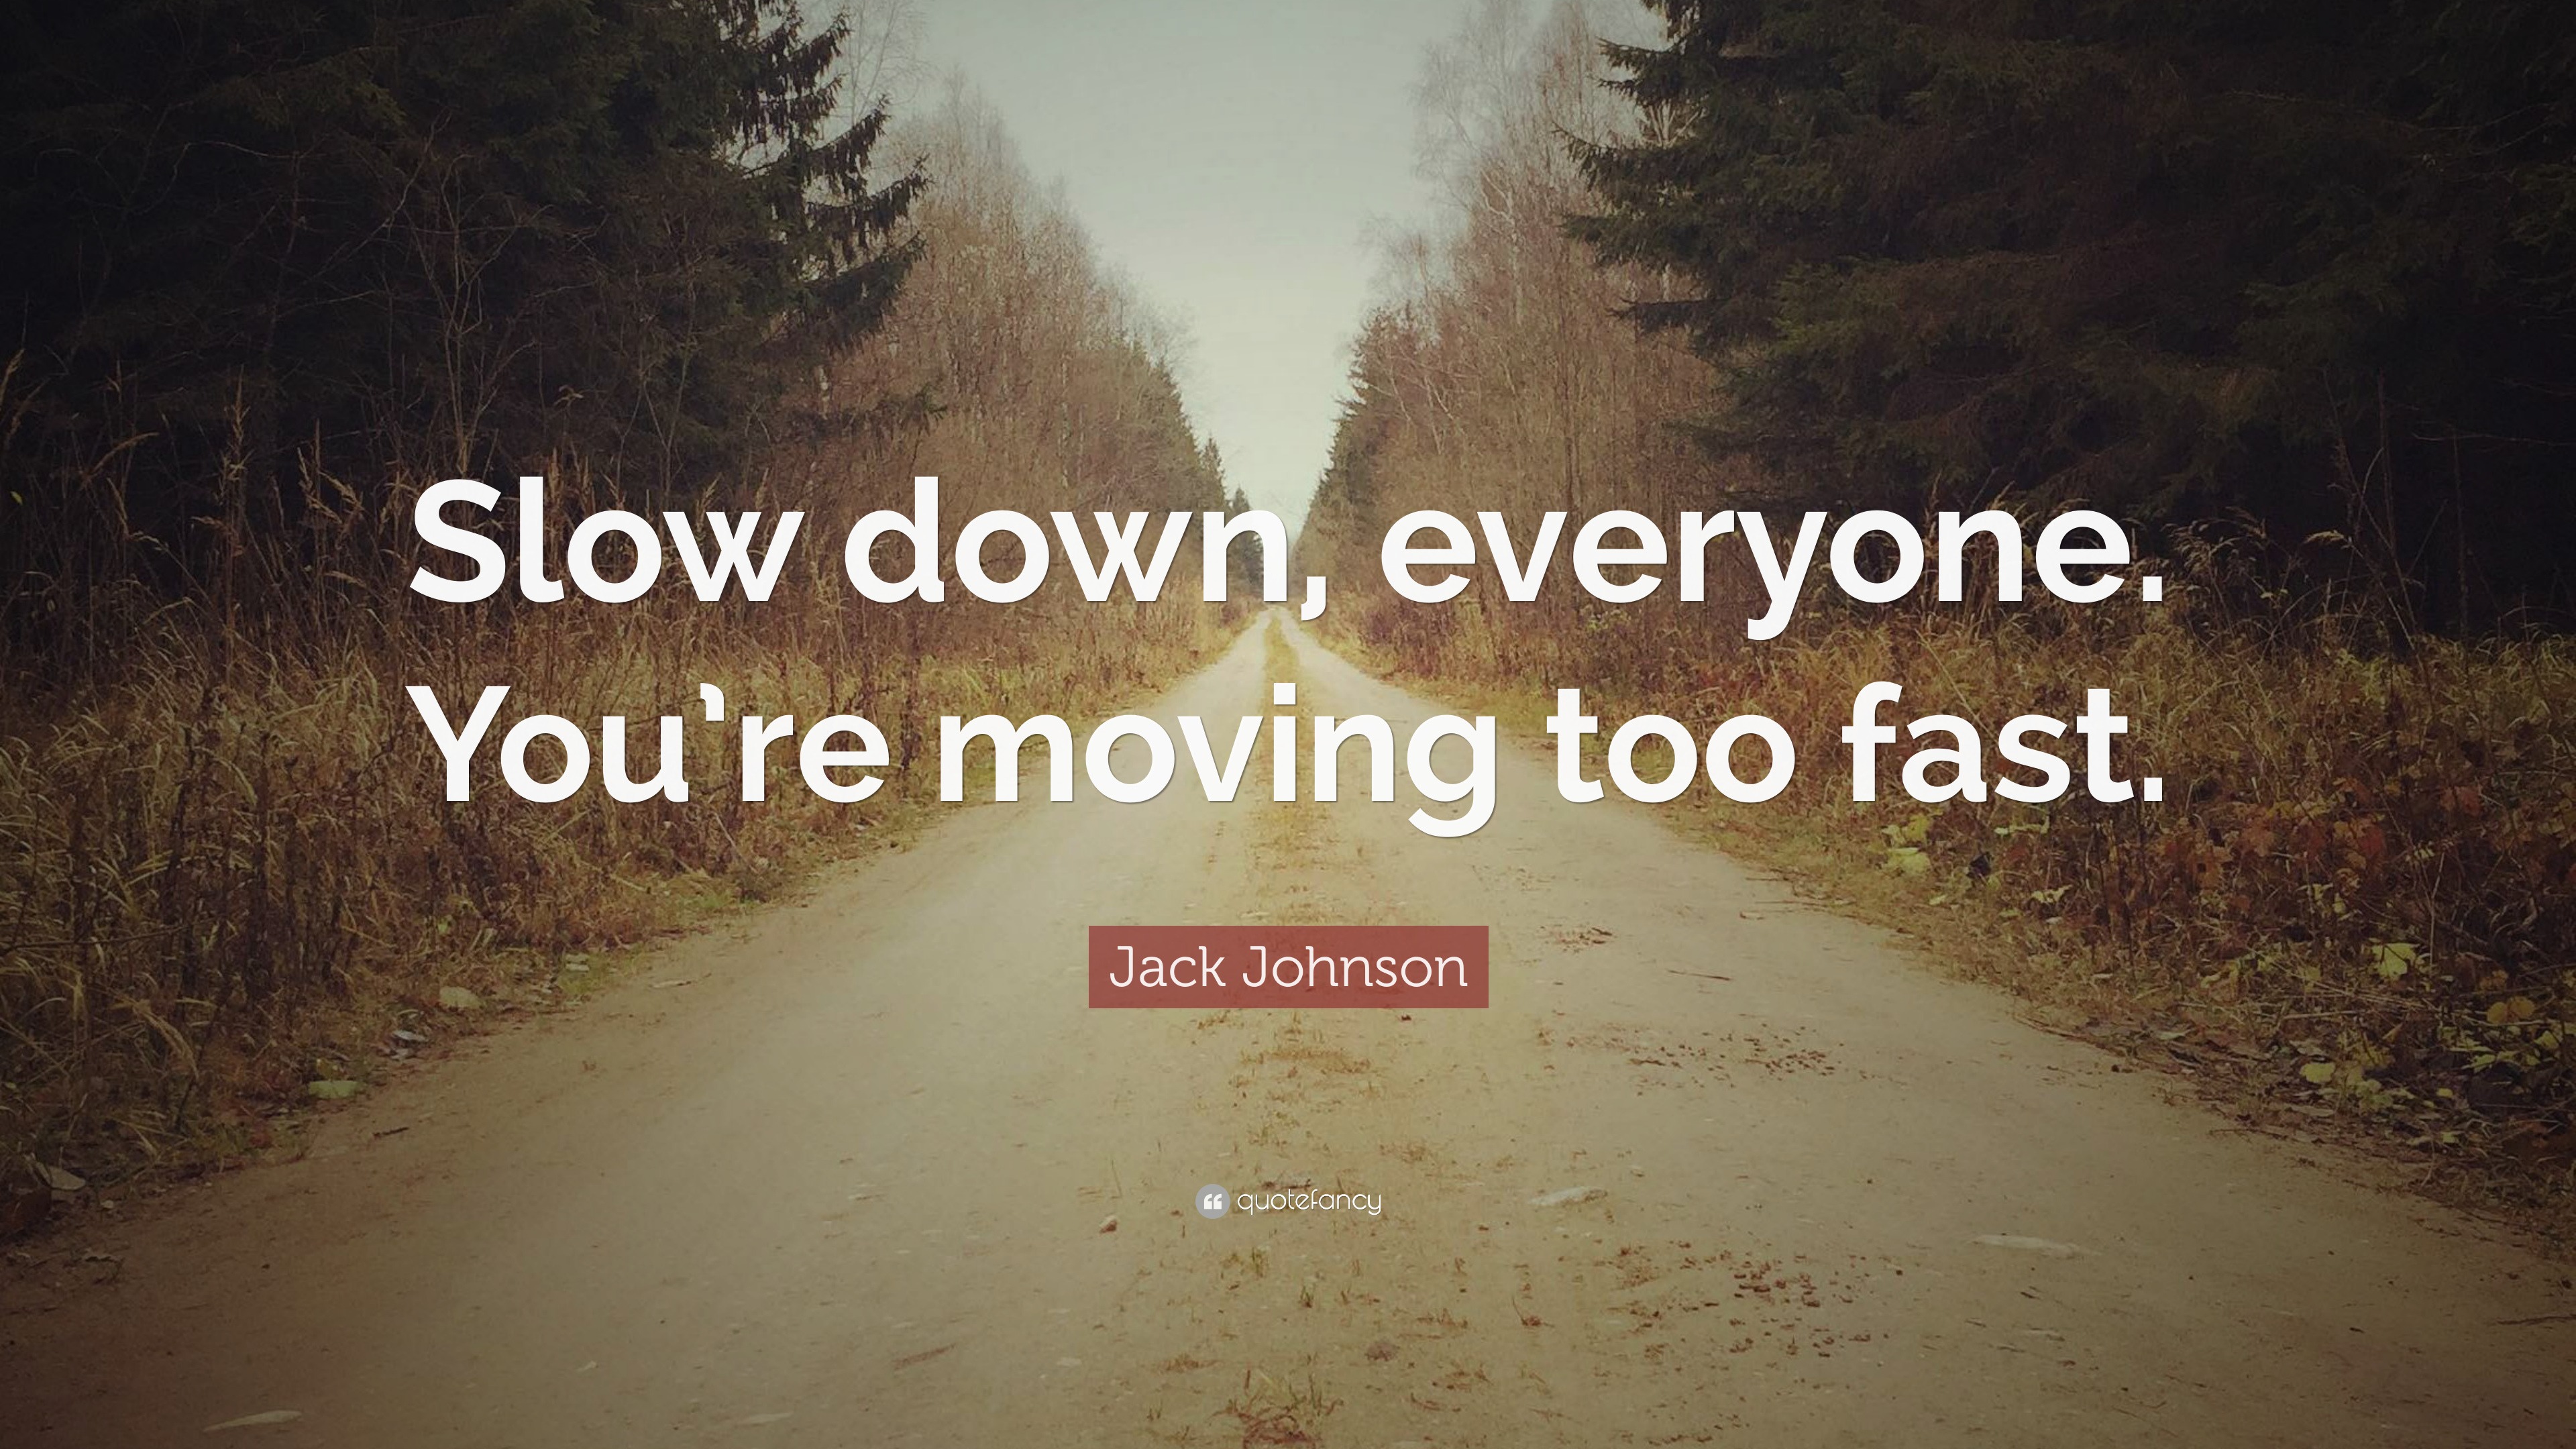 Jack Johnson Quote “Slow down, everyone. You’re moving too fast.”